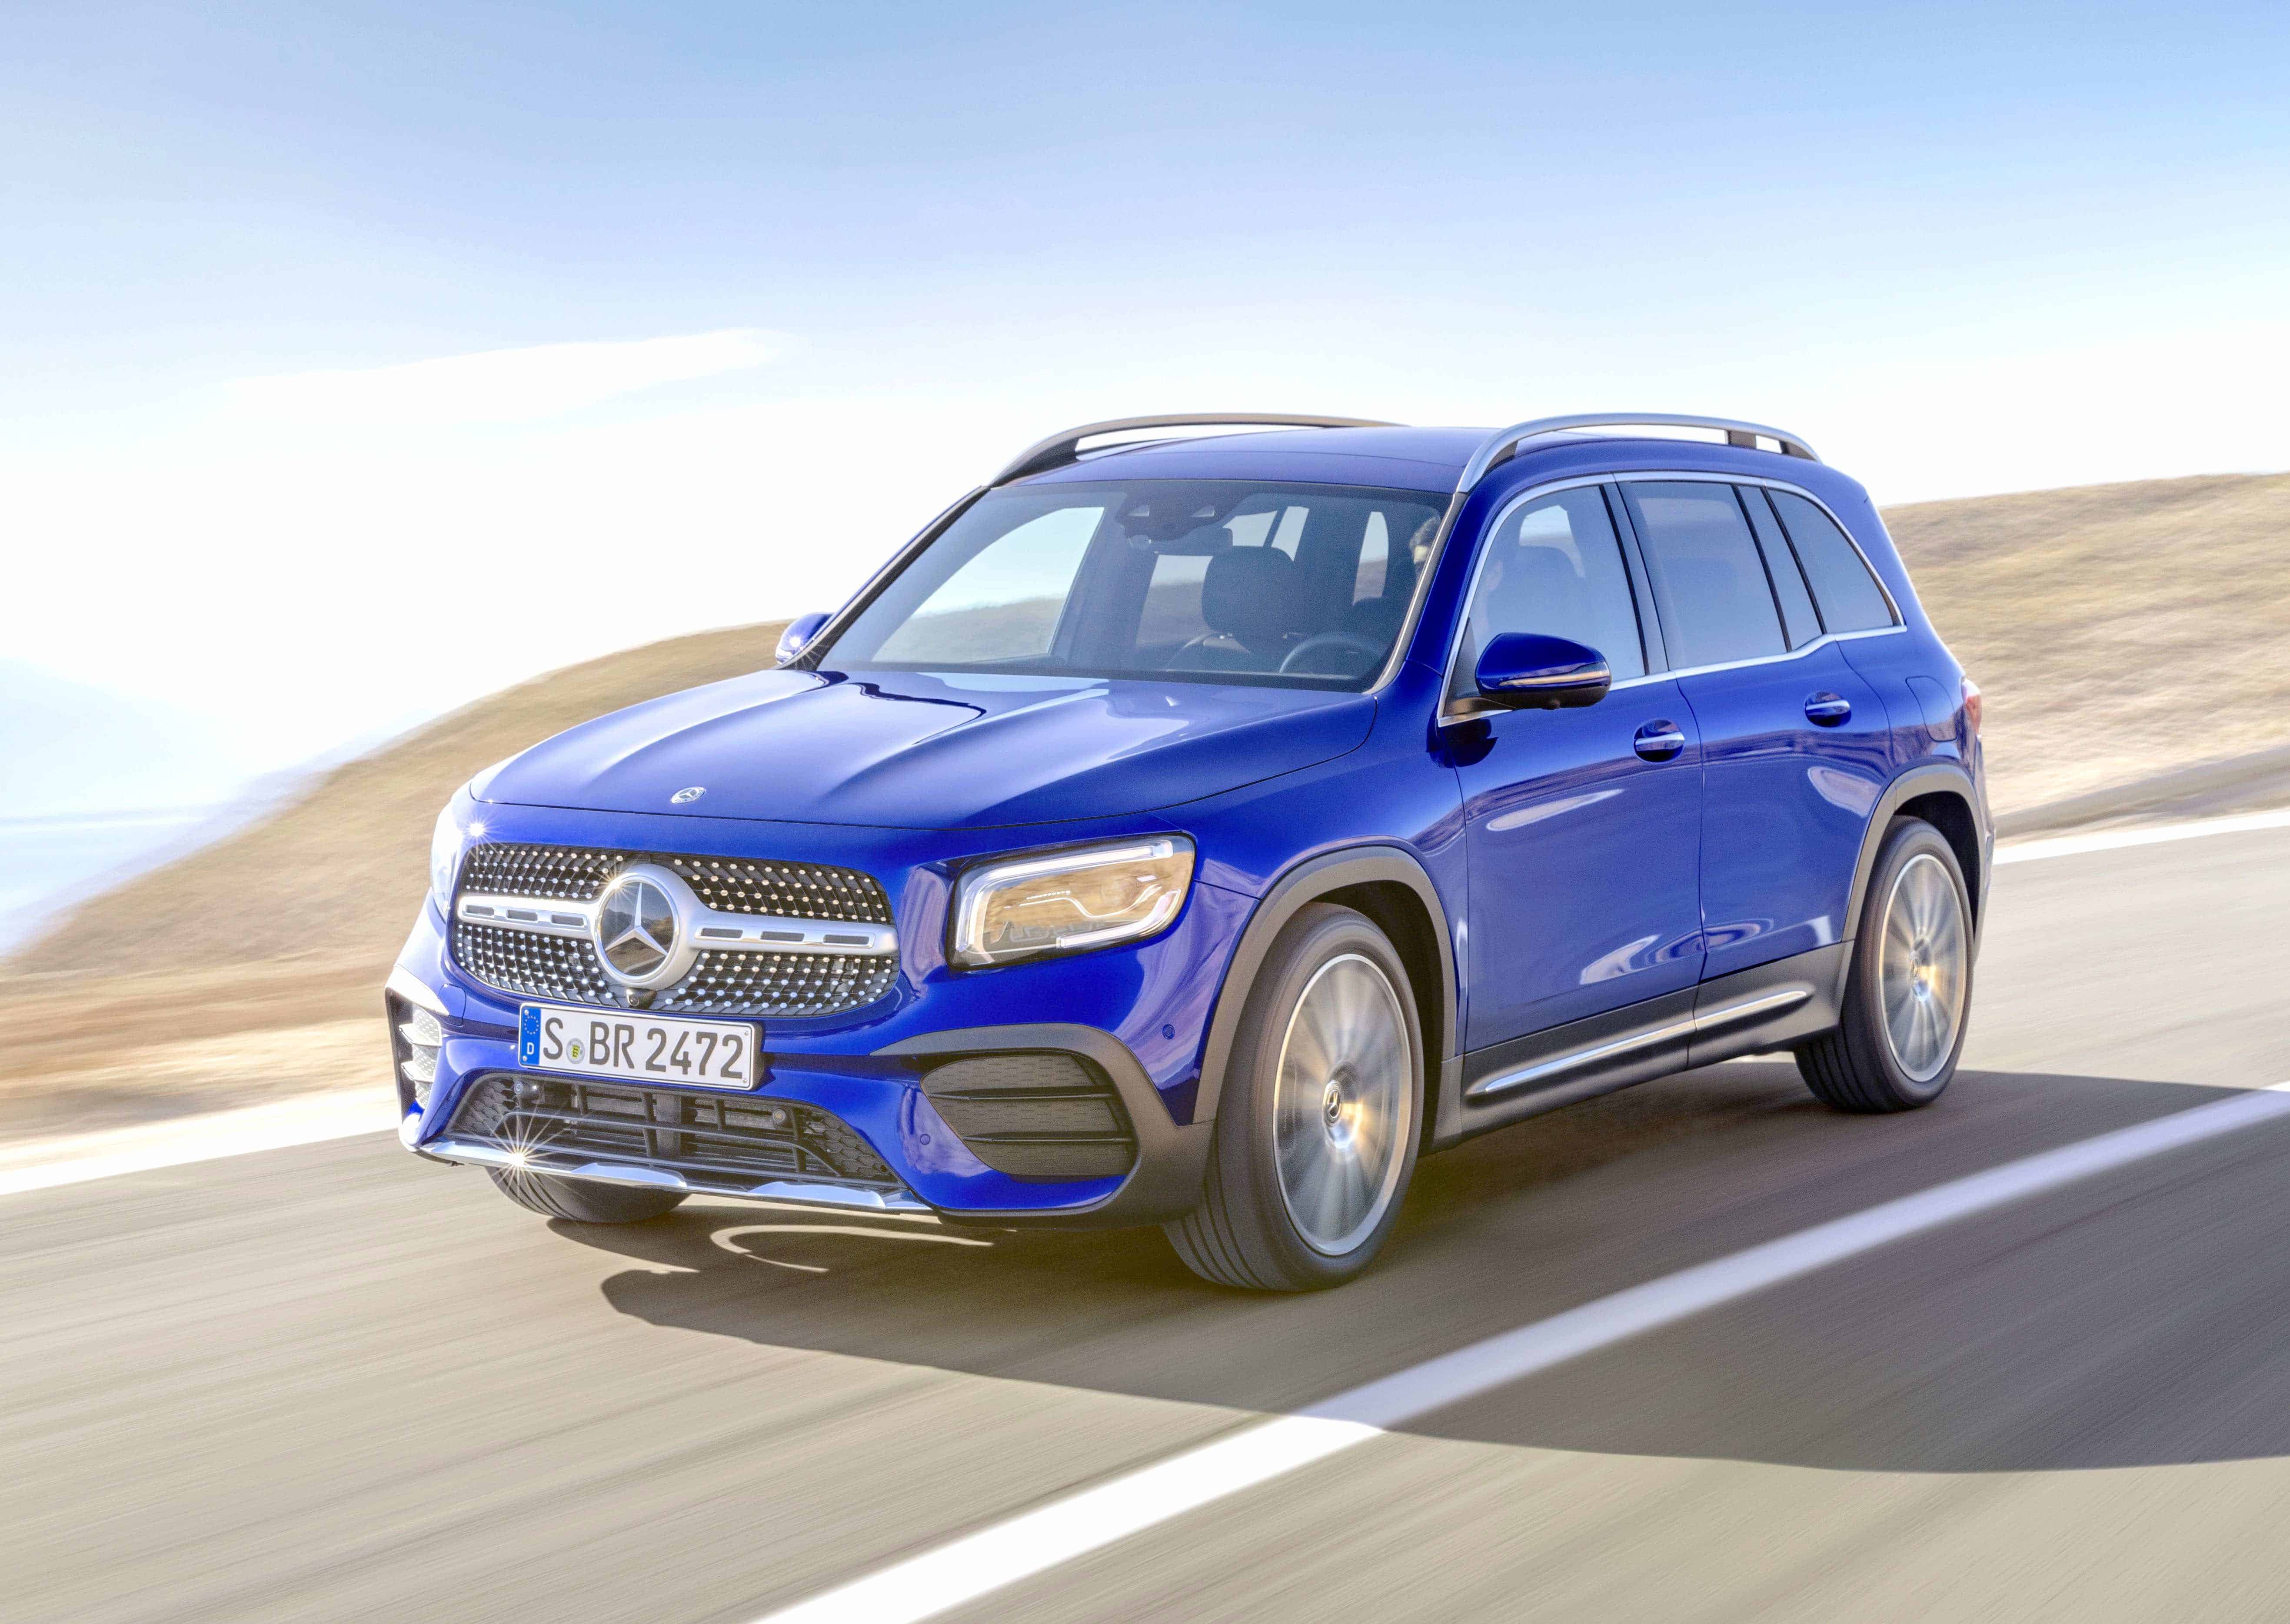 The new Mercedes-Benz GLB compact SUV